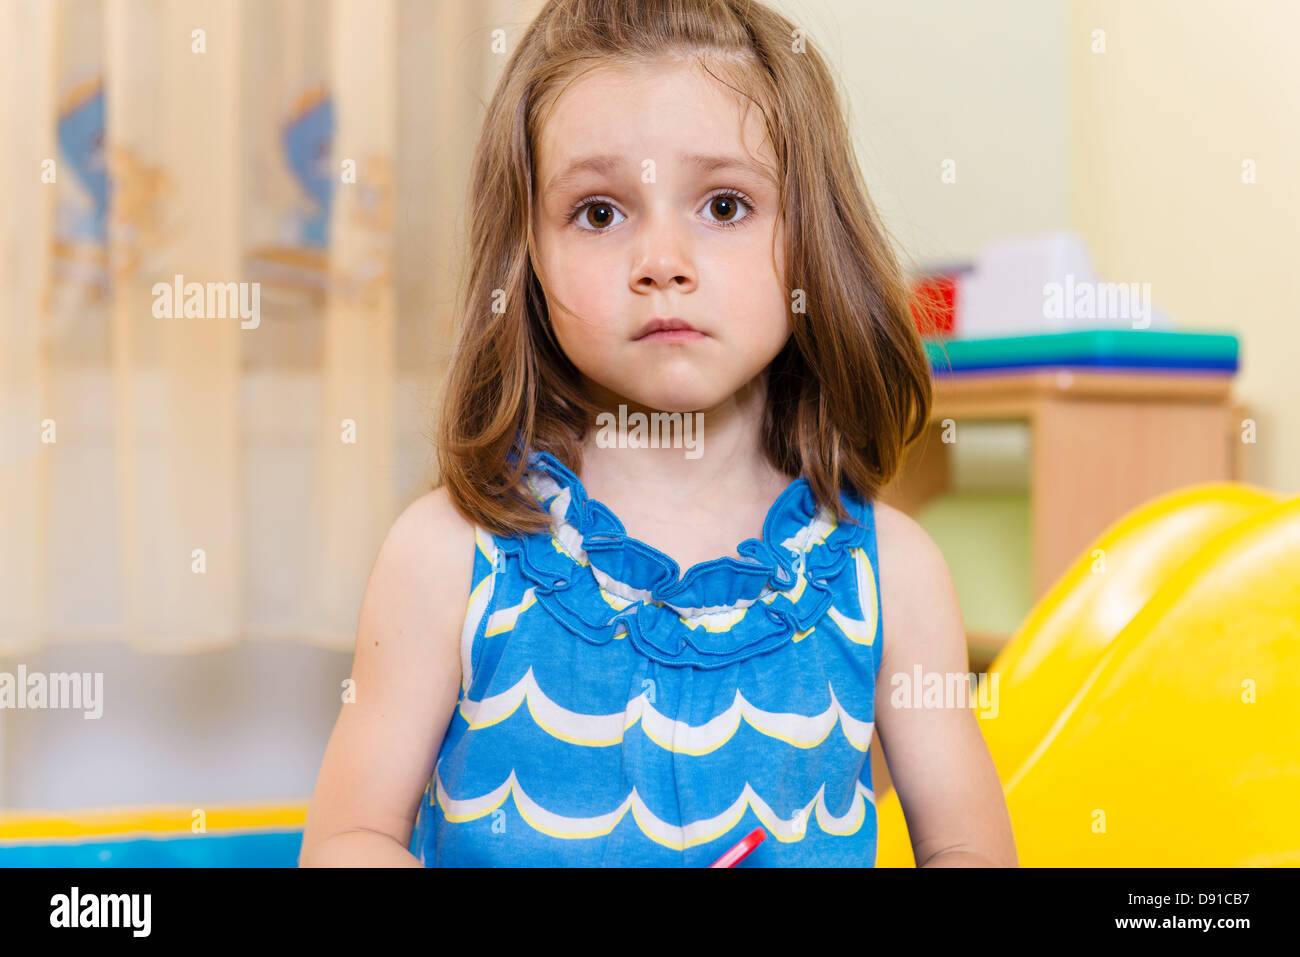 Portrait of cute serious little girl standing in playroom Stock Photo